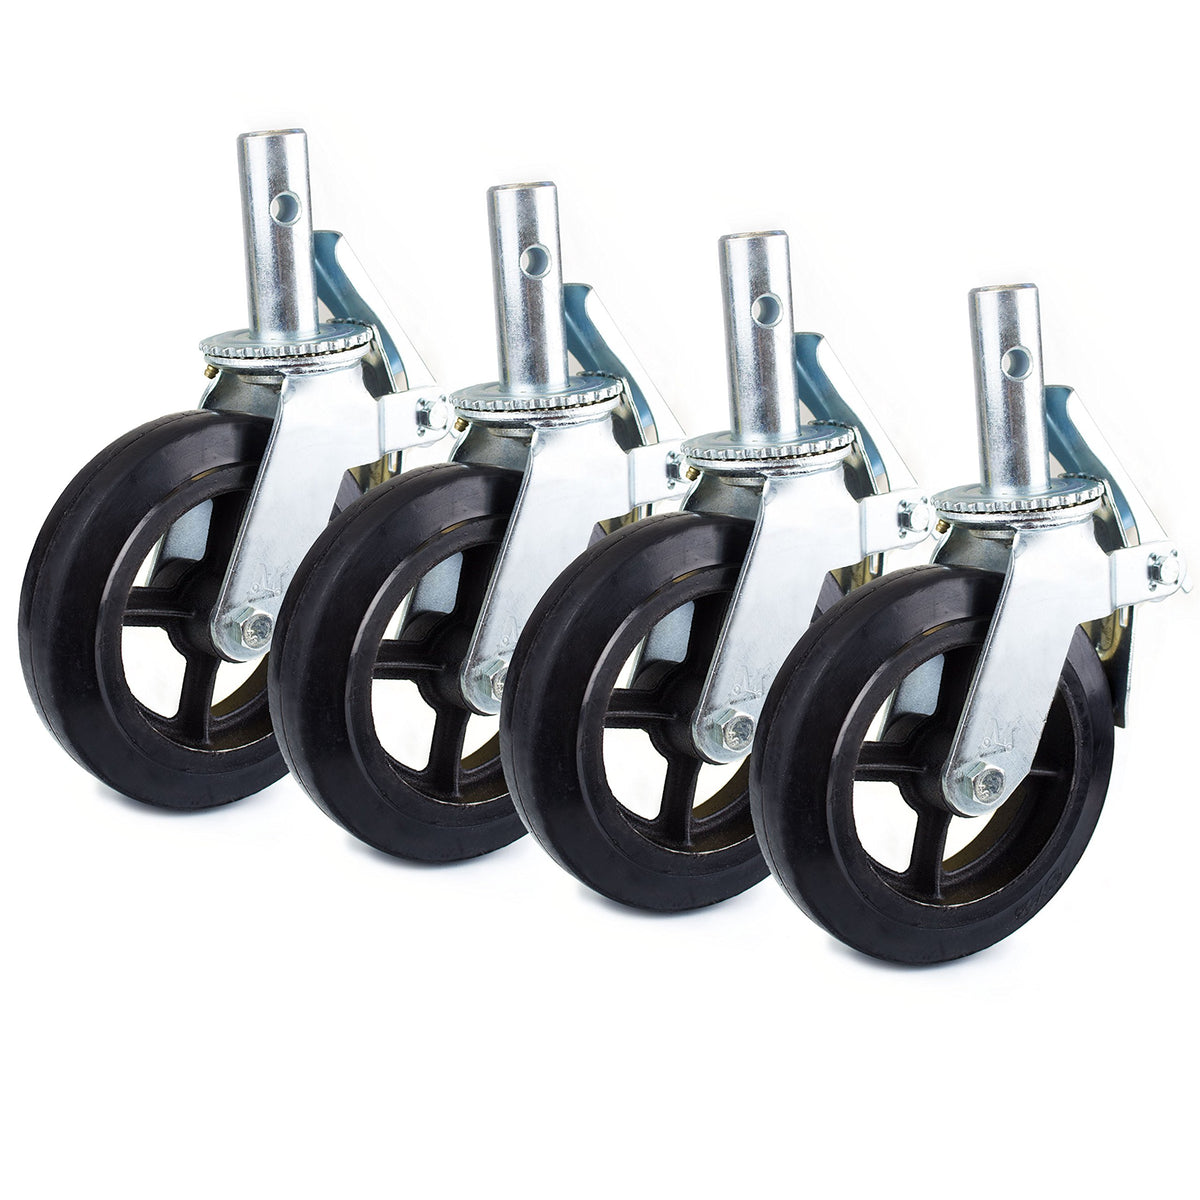 Set of 4 Scaffold 8"x2" Black Rubber Mold-on Steel Caster Wheel with Brake